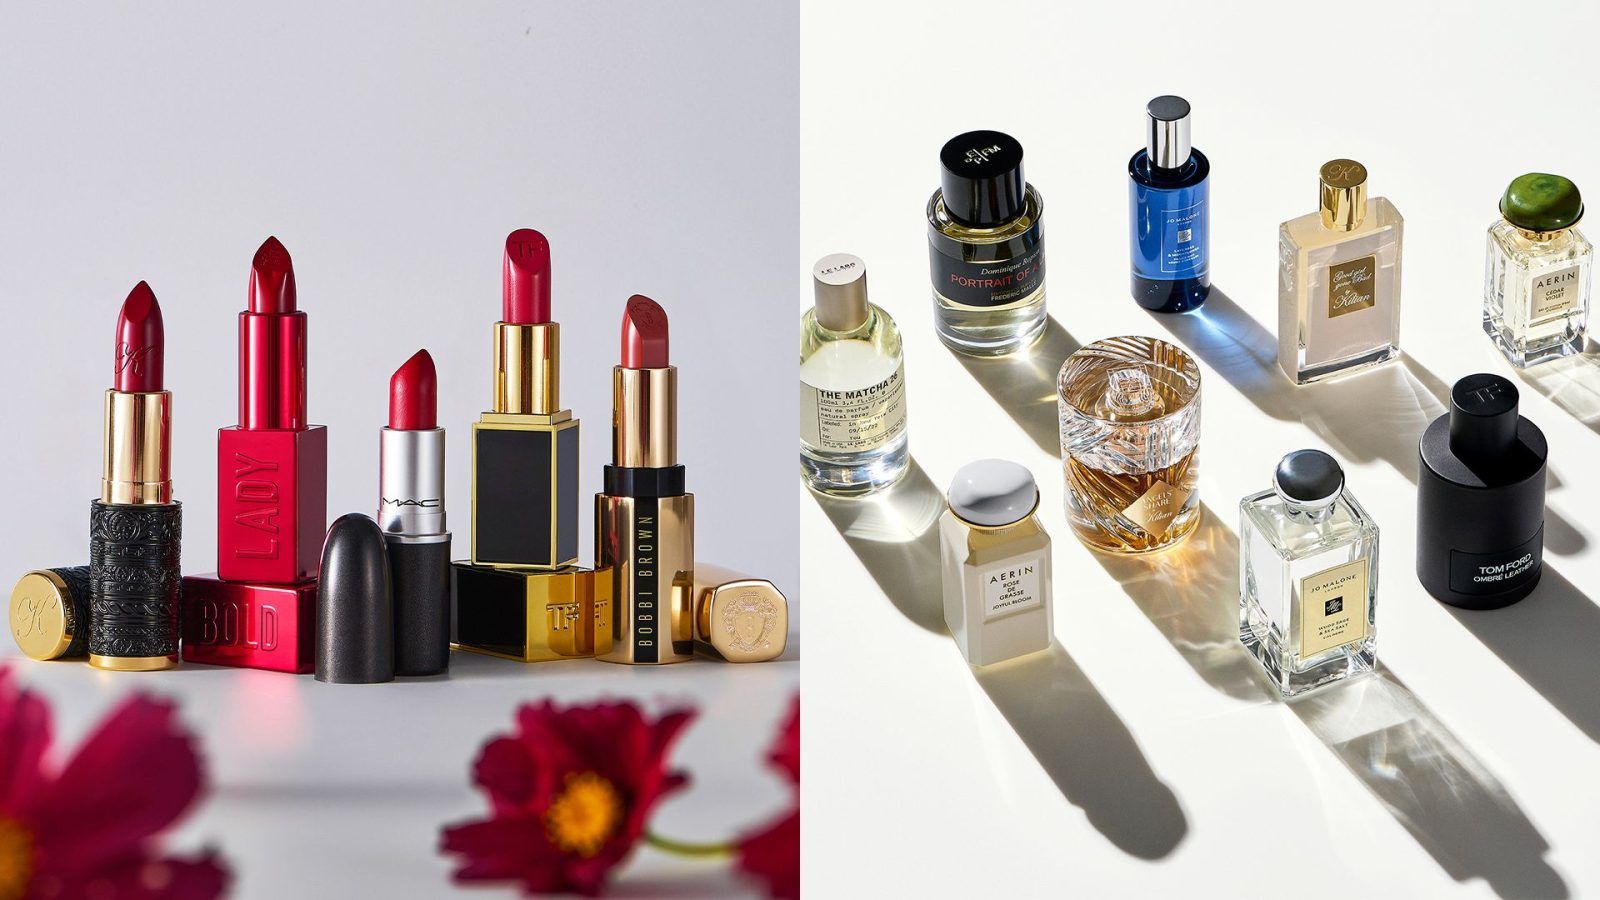 Estée Lauder aims to be the most accessible beauty brand in the world